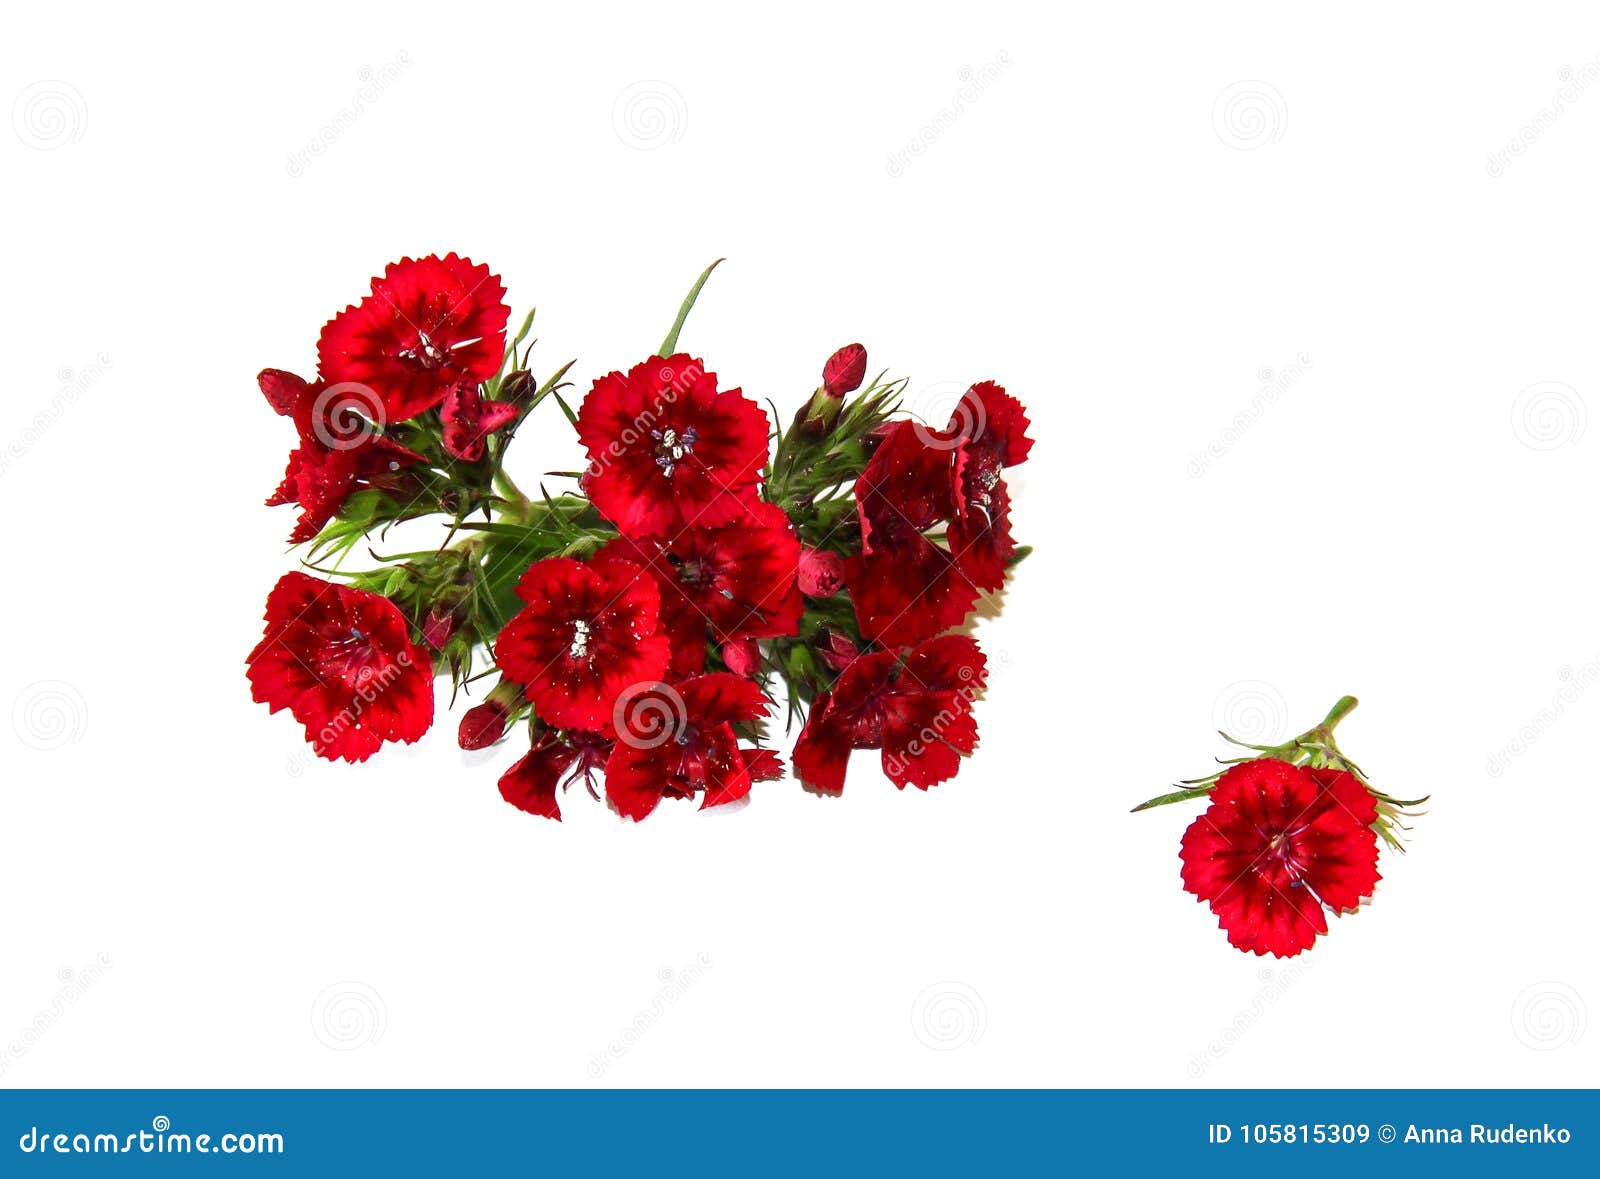 The Flowers of Charming Small Colored Carnations Stock Image - Image of ...